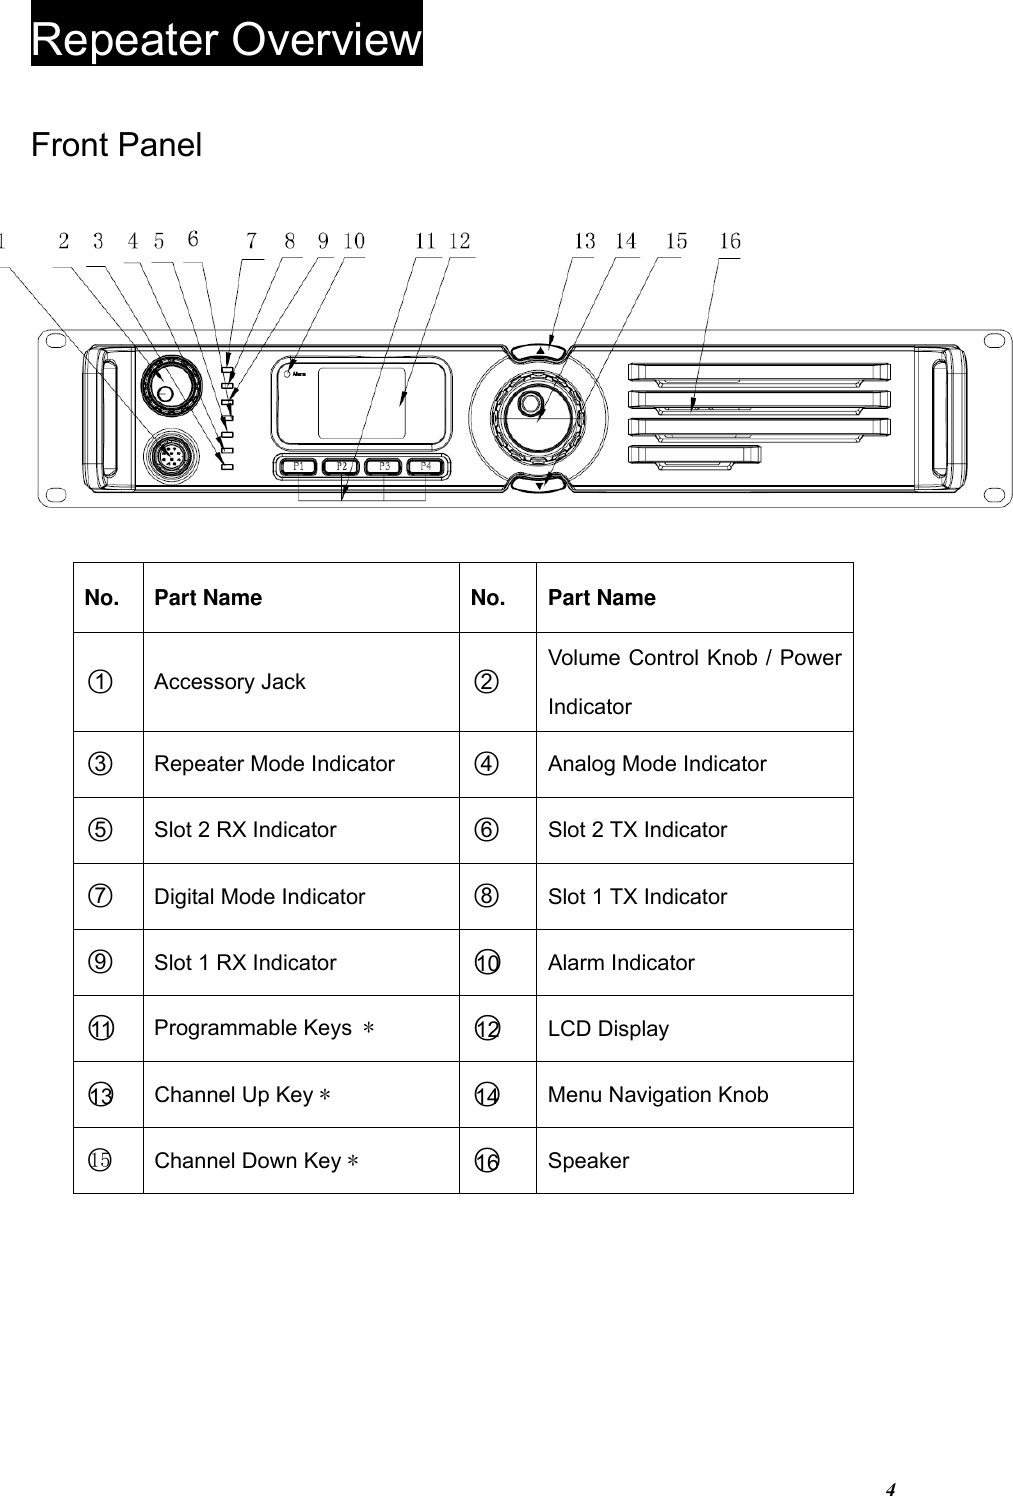 4Repeater Overview Front Panel No. Part Name No. Part Name ○1 Accessory Jack ○2 Volume Control Knob / Power Indicator ○3 Repeater Mode Indicator  ○4 Analog Mode Indicator ○5 Slot 2 RX Indicator  ○6 Slot 2 TX Indicator ○7  Digital Mode Indicator  ○8  Slot 1 TX Indicator ○9  Slot 1 RX Indicator  ○10   Alarm Indicator ○11   Programmable Keys * ○12   LCD Display ○13   Channel Up Key * ○14   Menu Navigation Knob ○15  Channel Down Key * ○16   Speaker